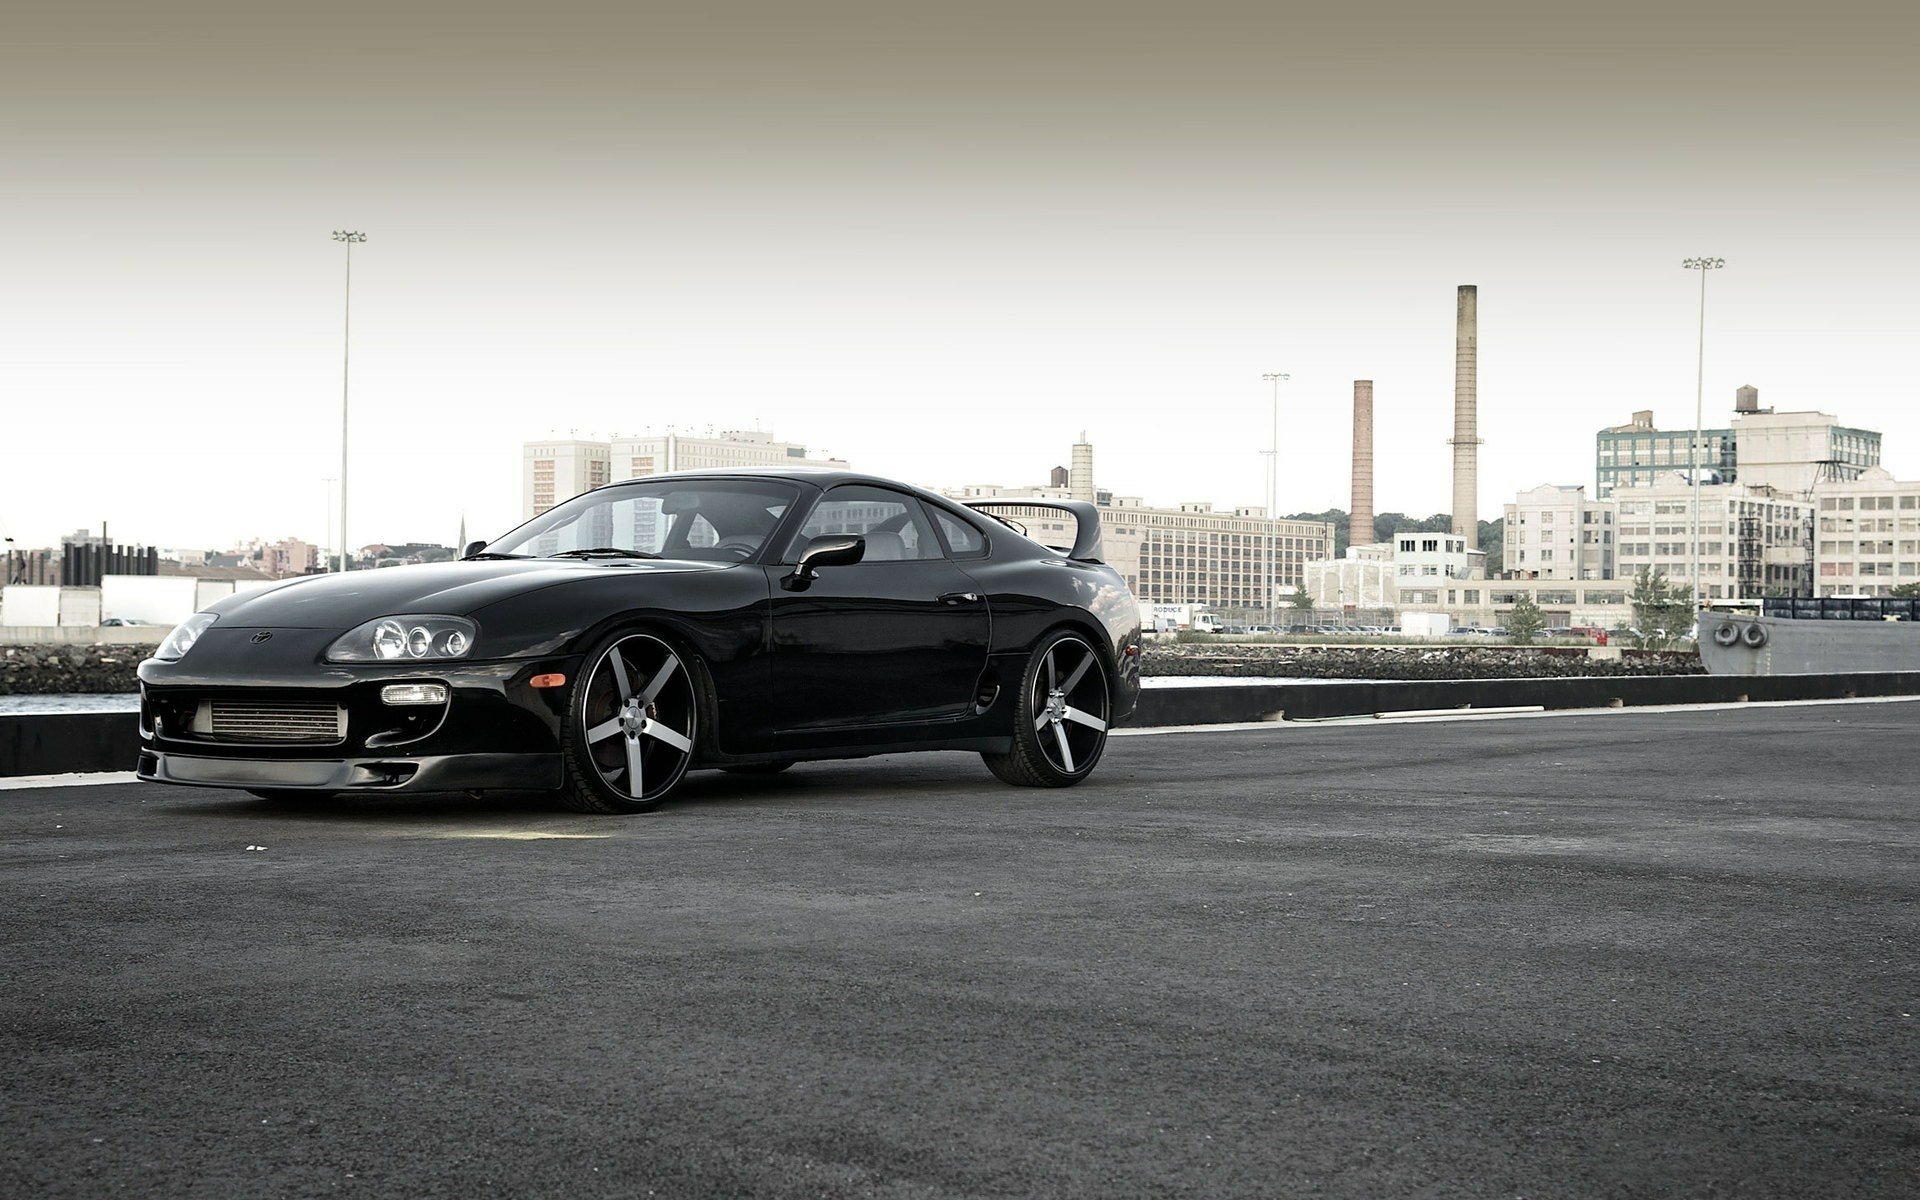 Toyota Supra Full HD Wallpaper and Background Image | 1920x1200 | ID:444928